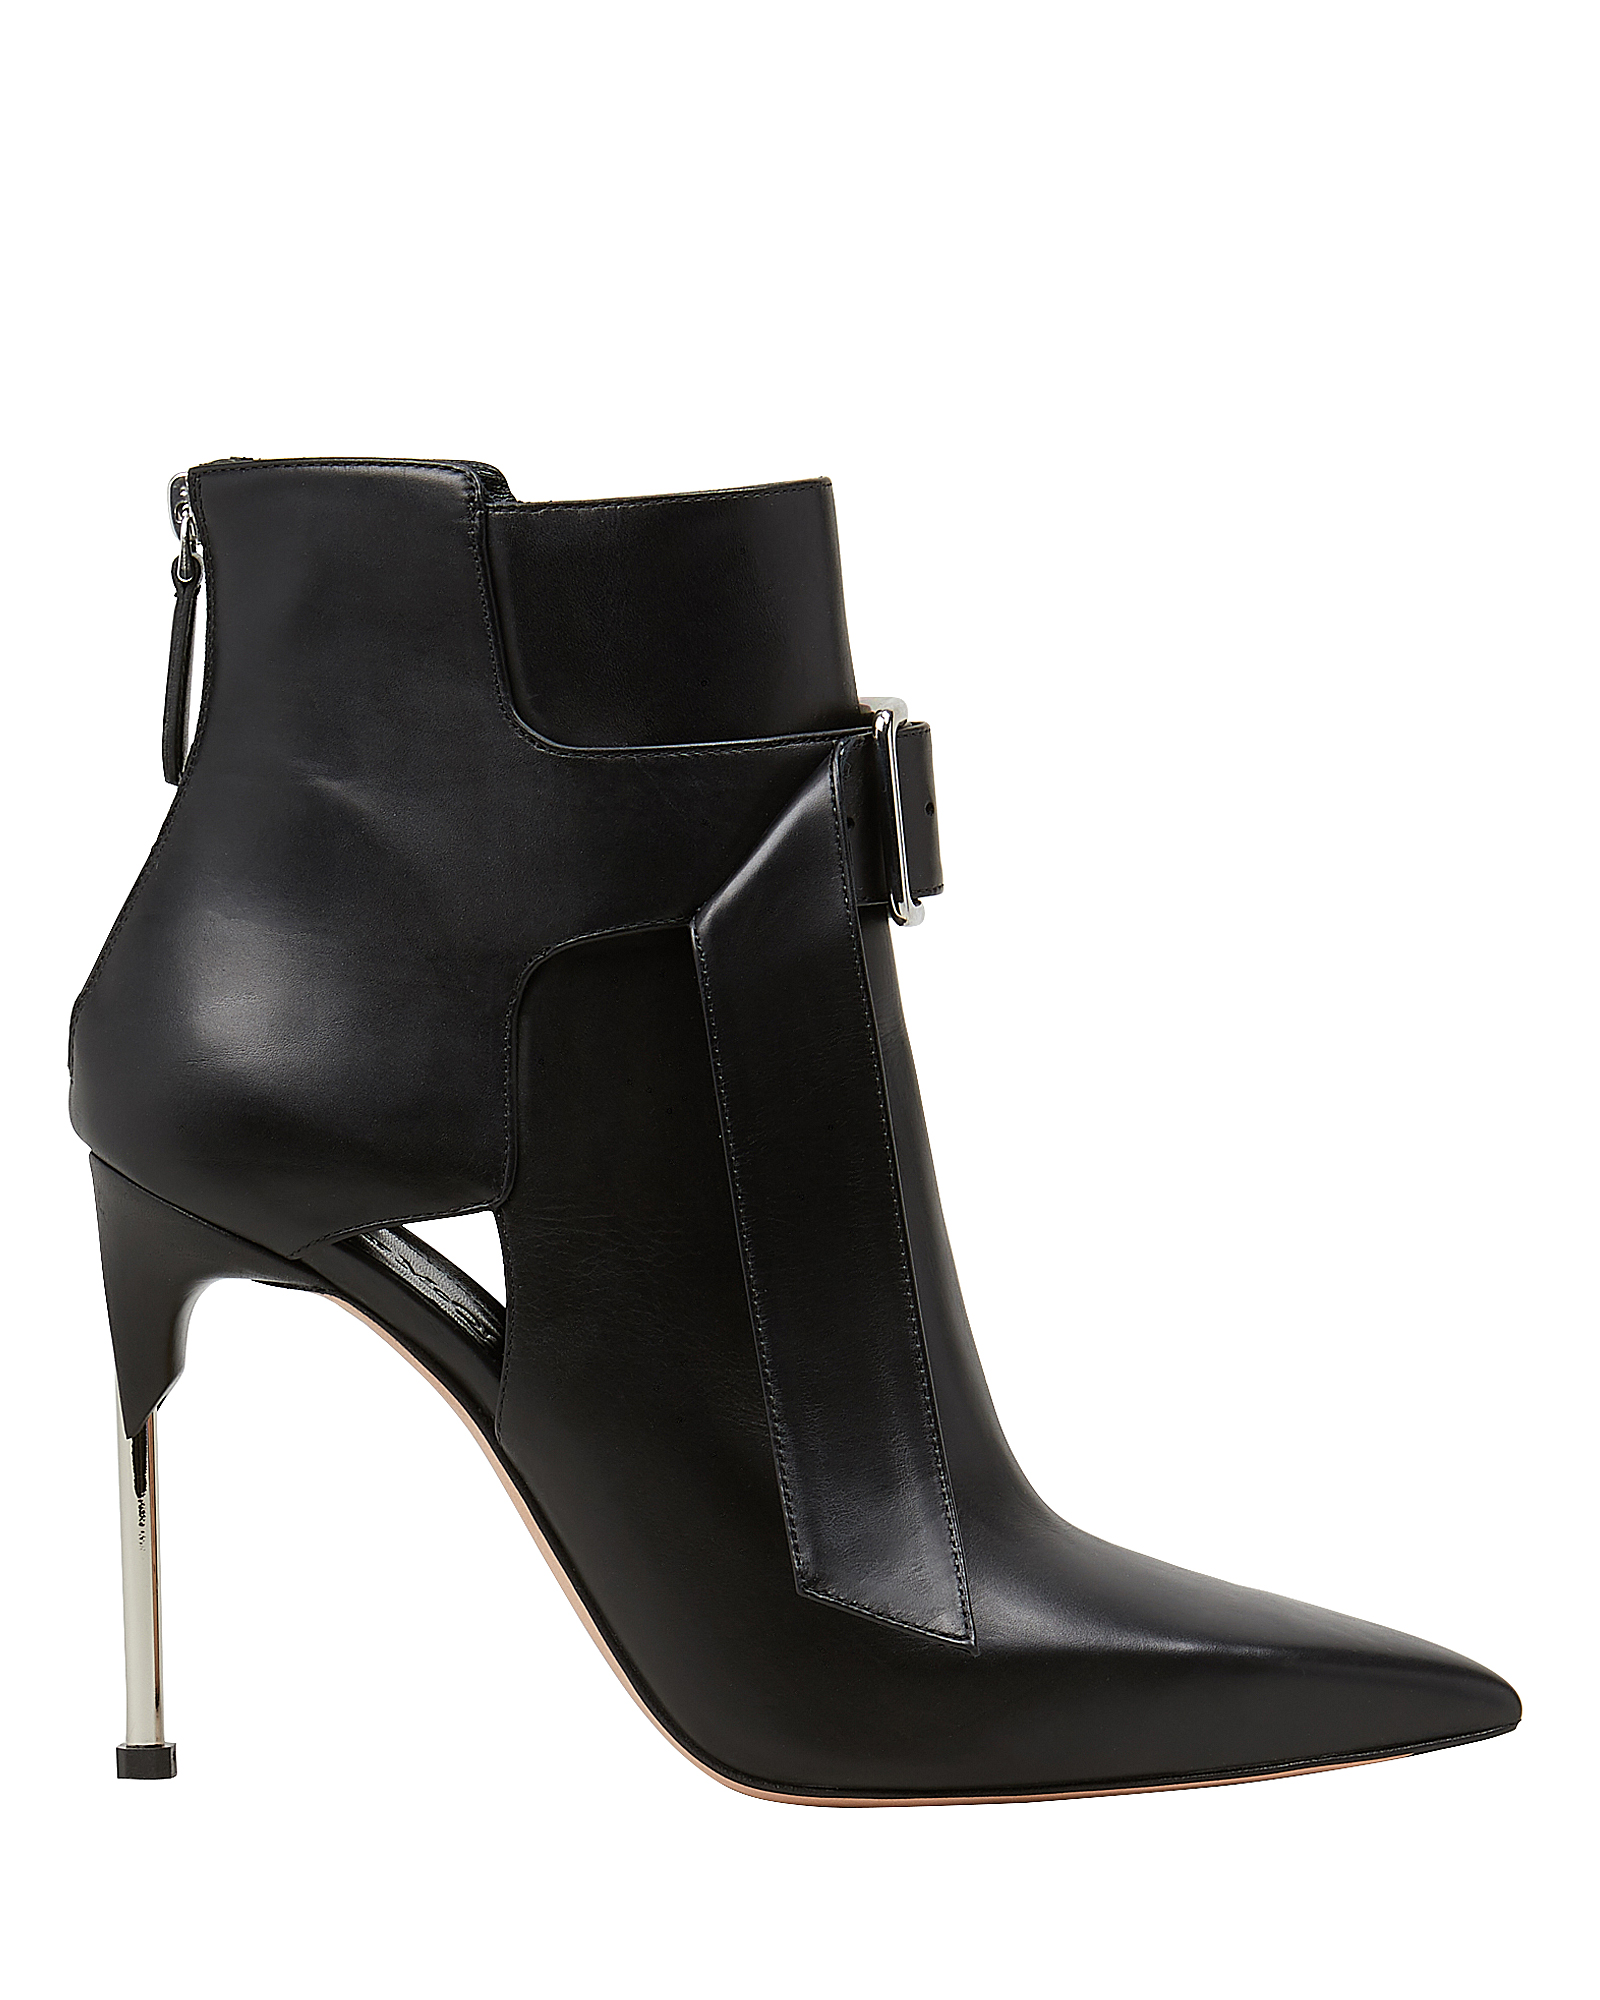 Buckled Black Leather Booties | INTERMIX®